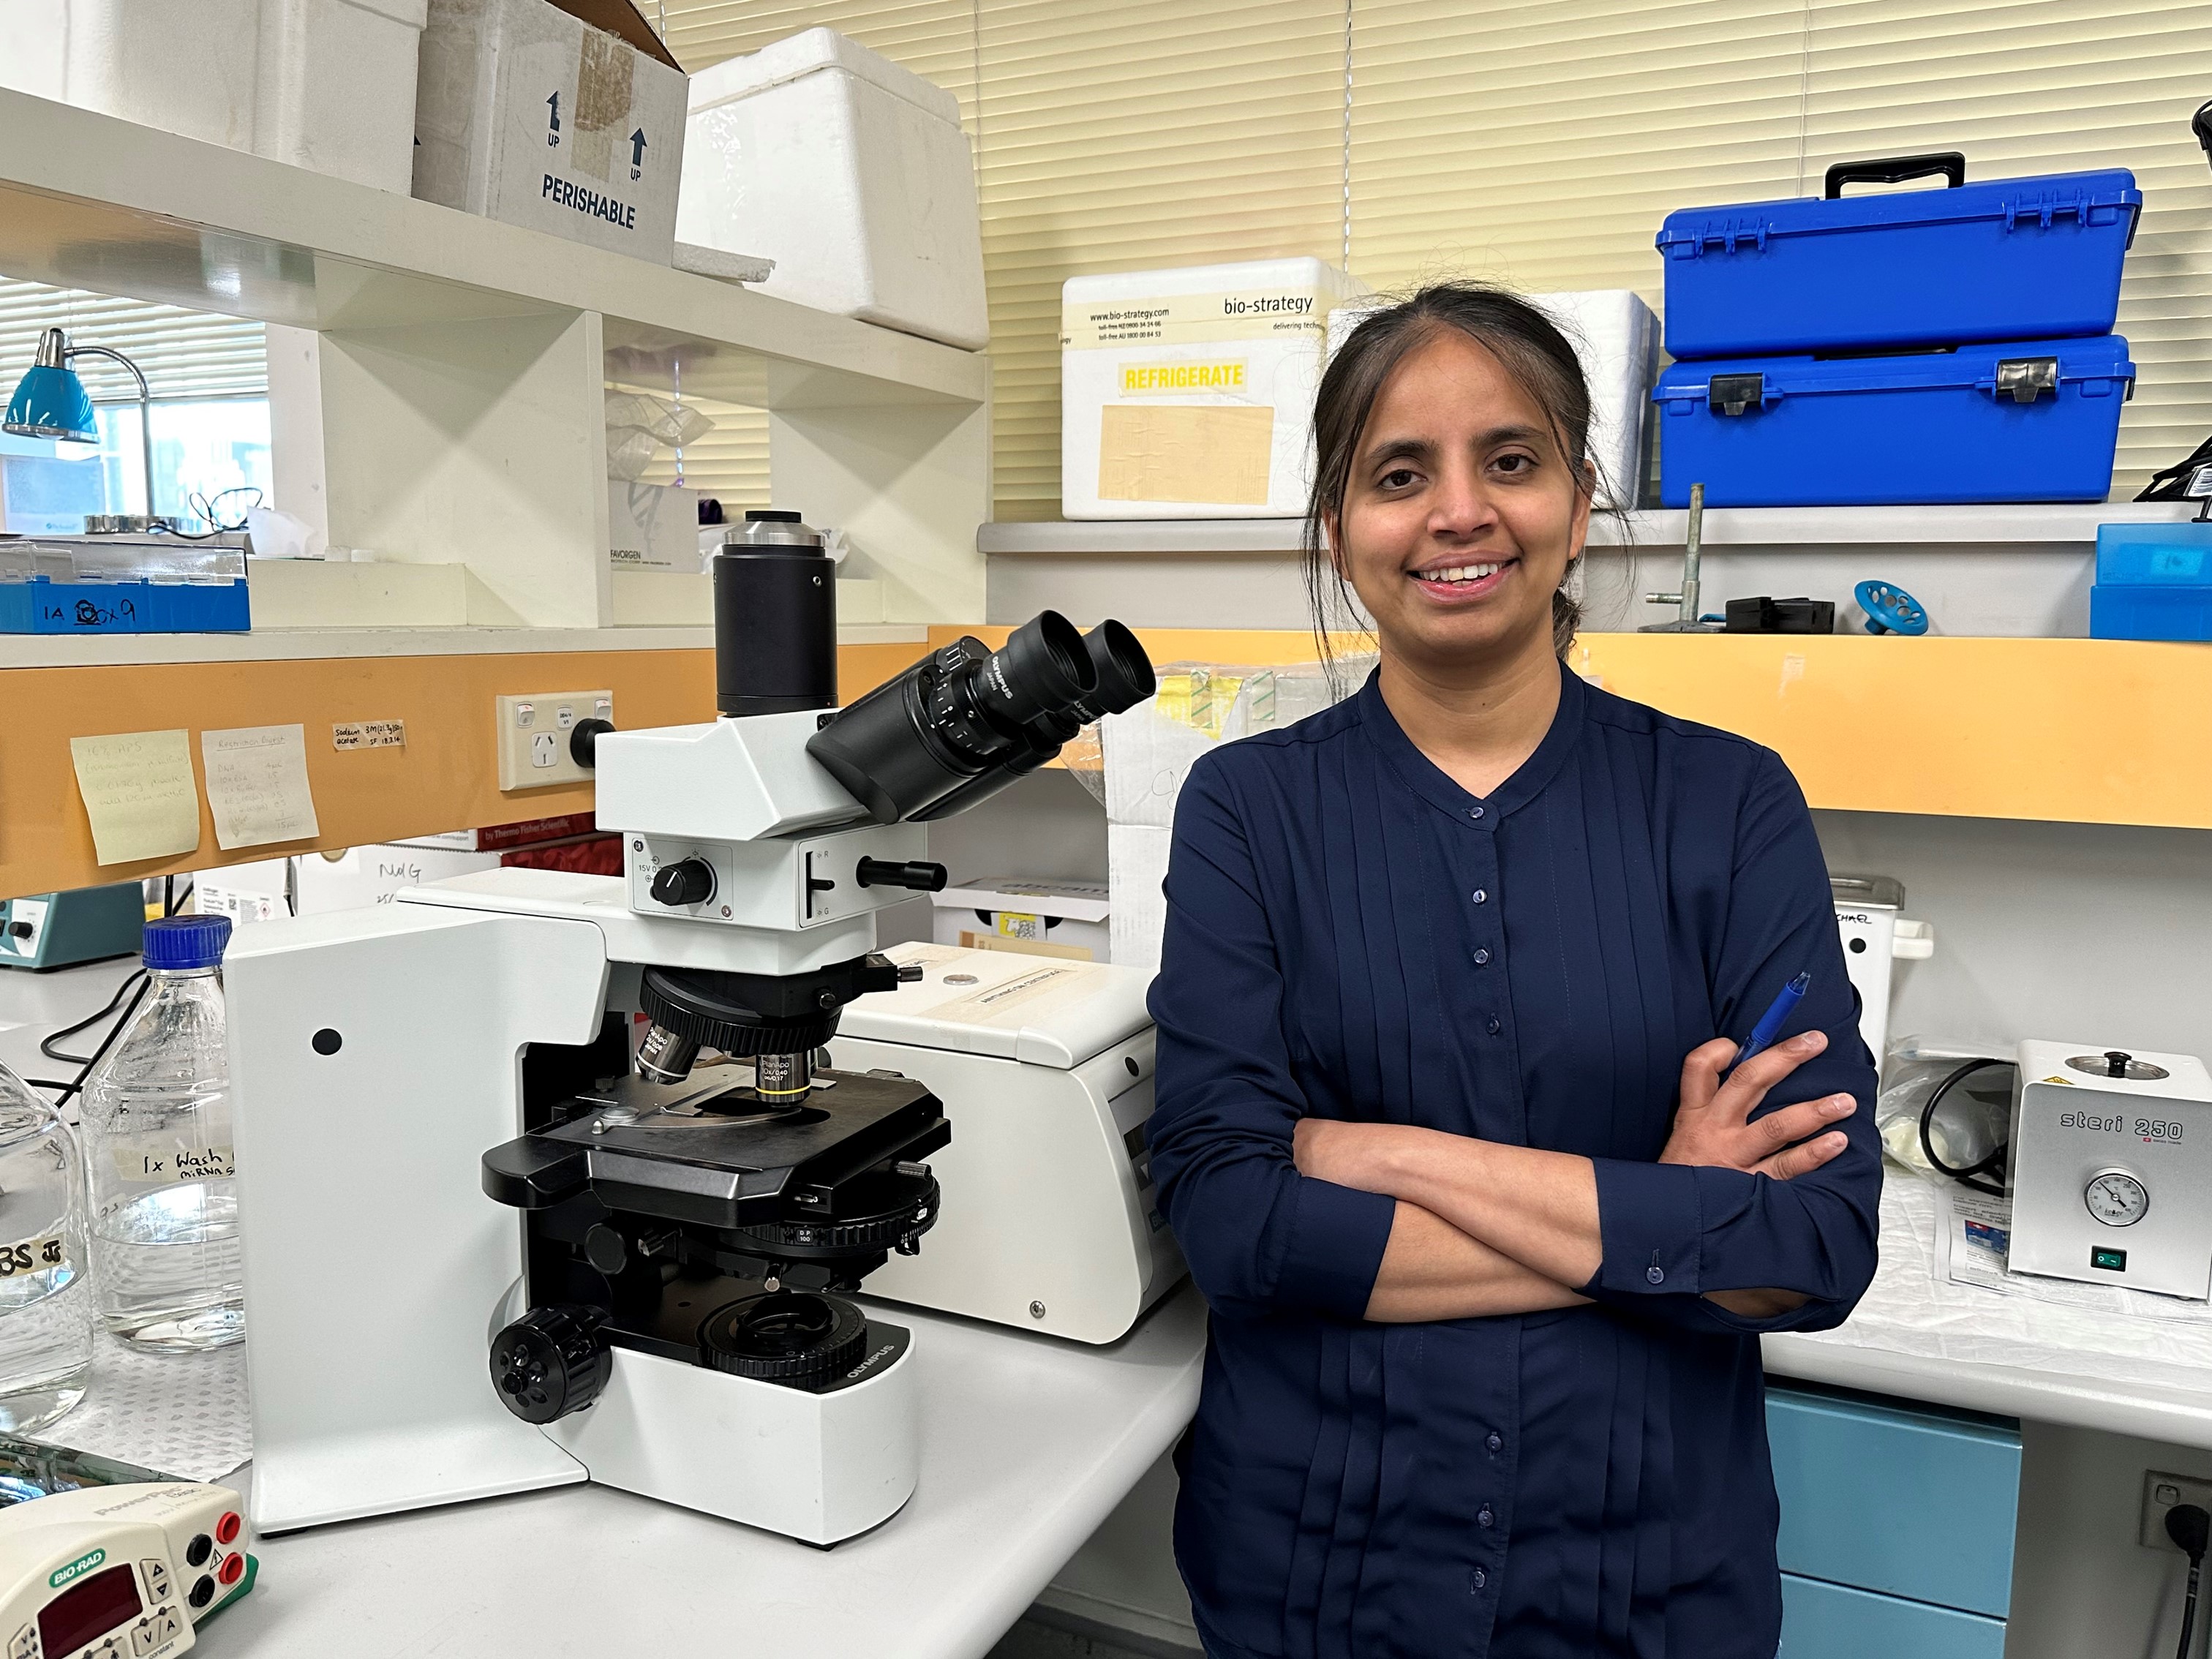 Dr Bhavna Padhye from the Children's Cancer Research Unit, The Children's Hospital at Westmead is researching the identification of cancer-predisposing germline variants.